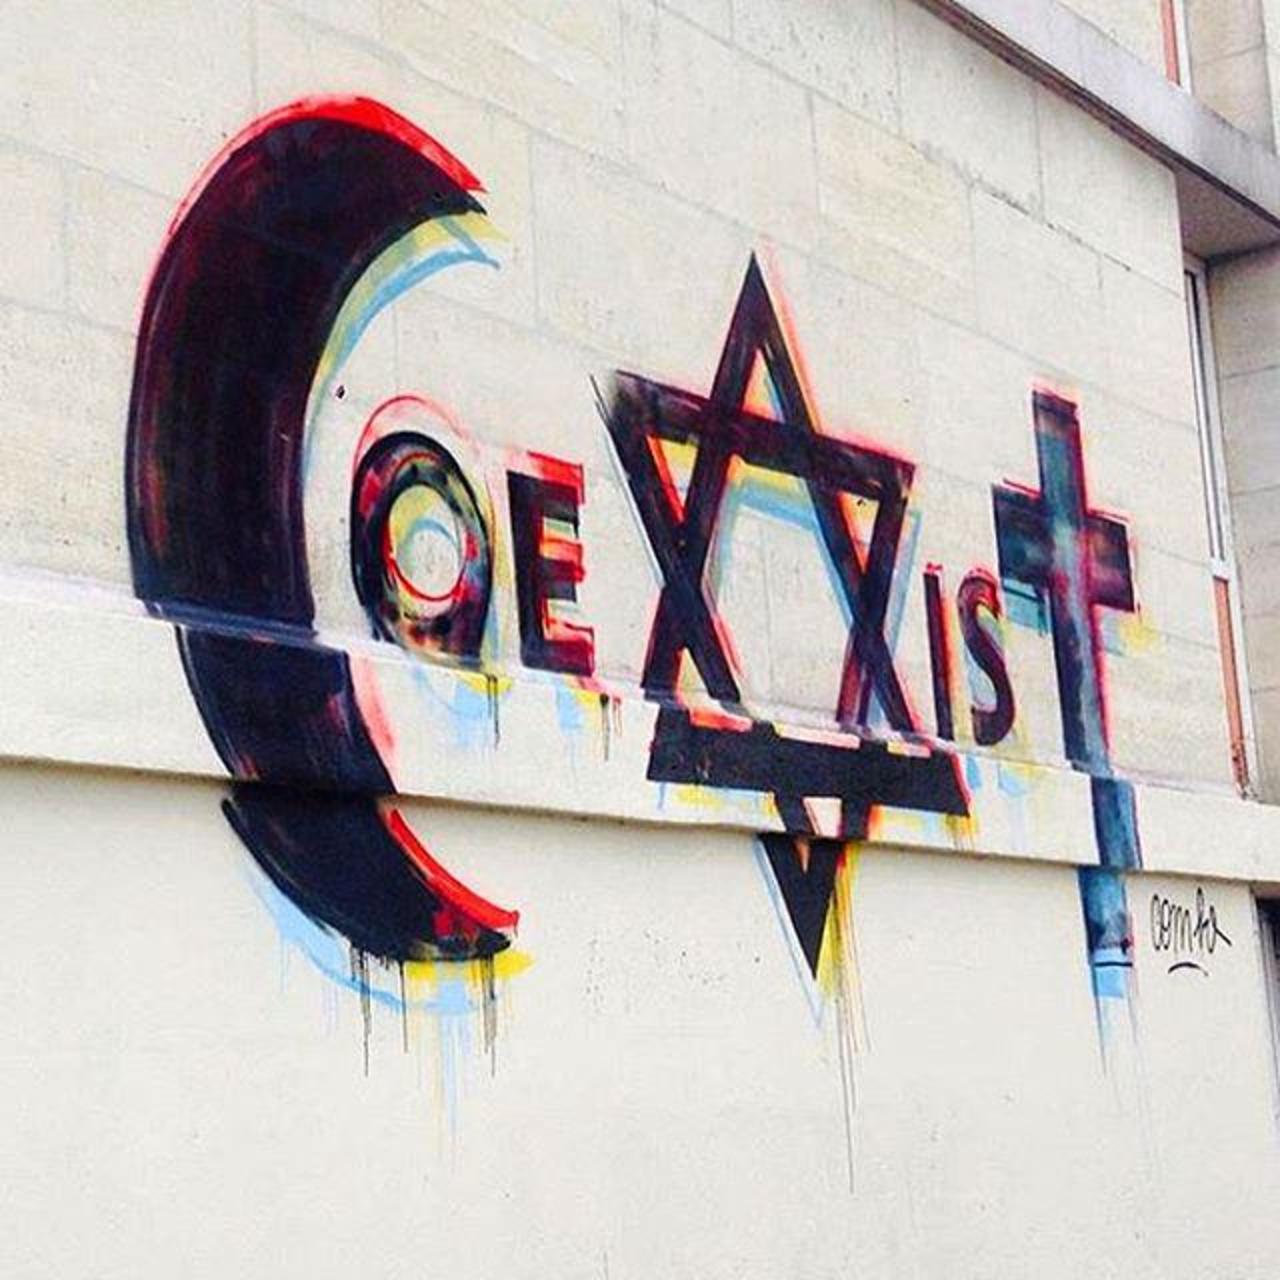 'Coexist' Meaningful new mural from Combo in Sarcelles, France. #StreetArt #Graffiti #Mural http://t.co/DJMplcNz54